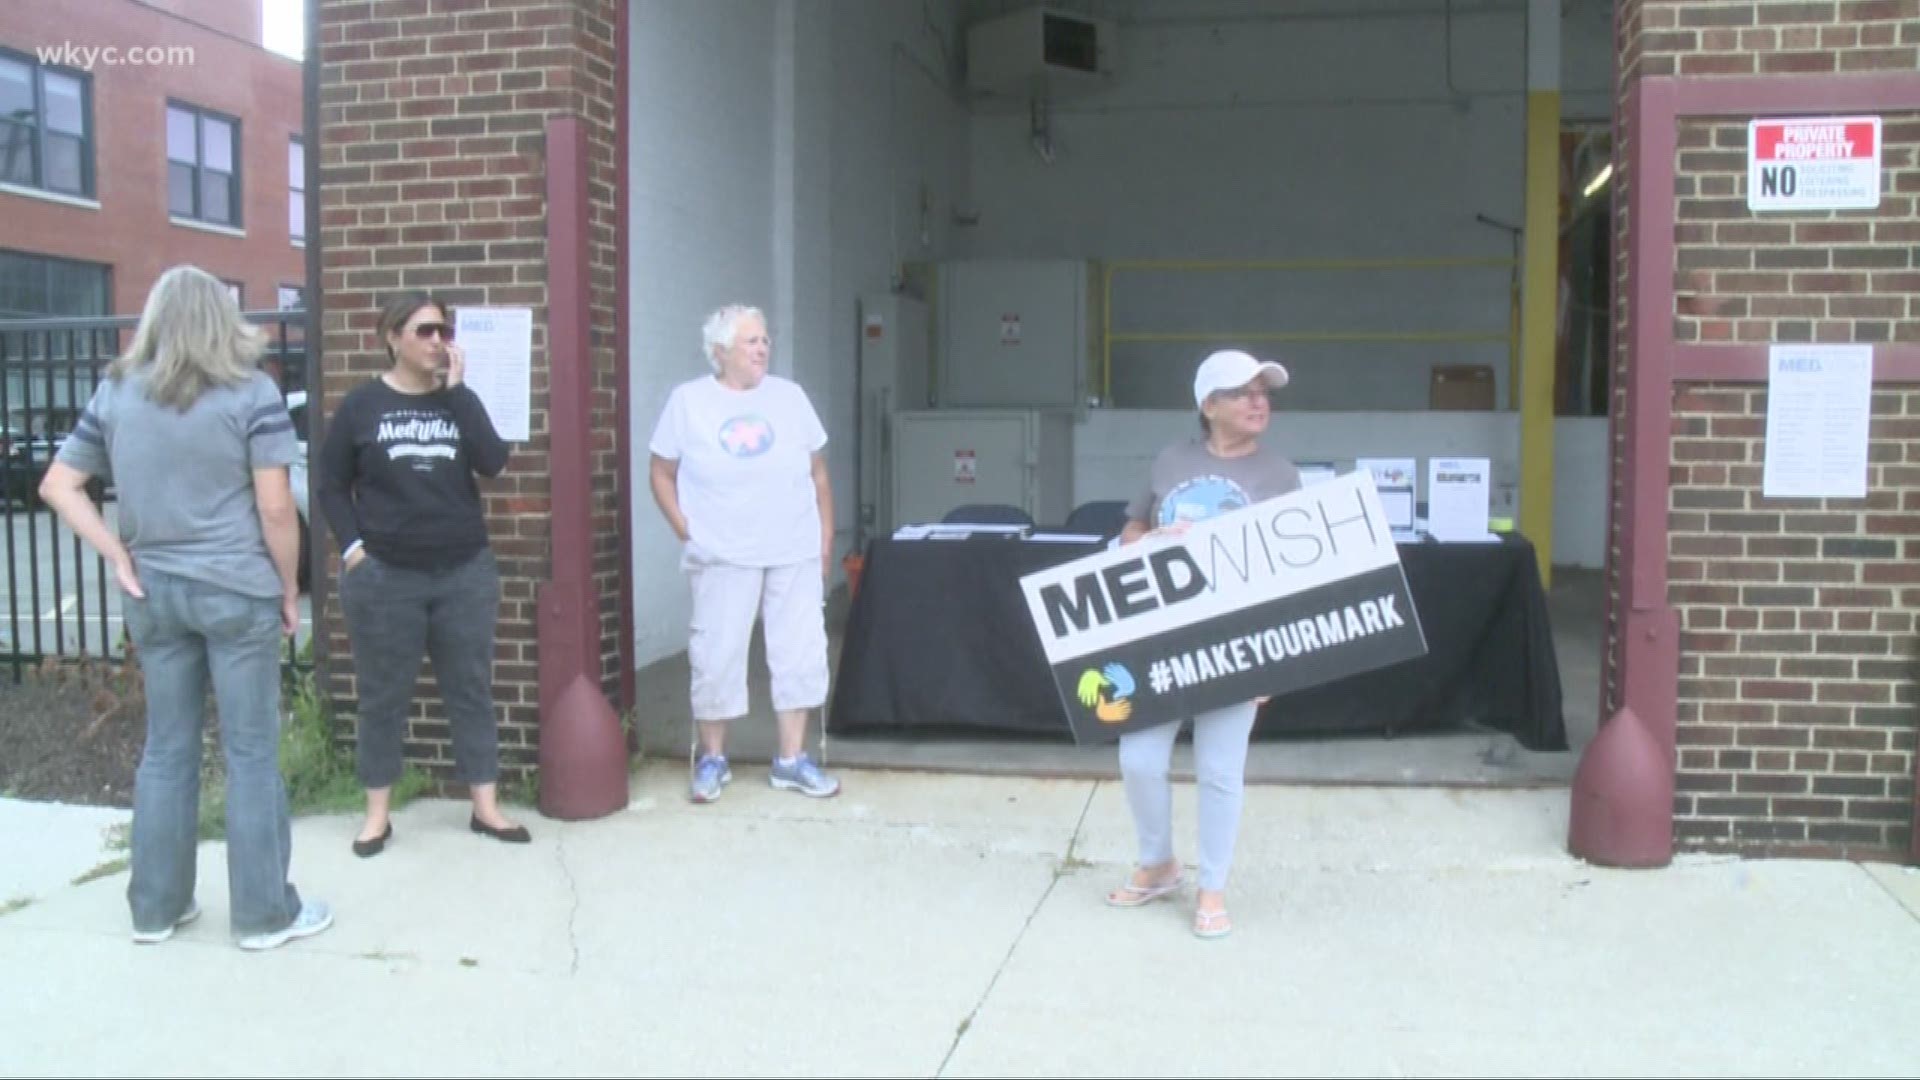 Medwish collected donations for victims of Hurricane Dorian